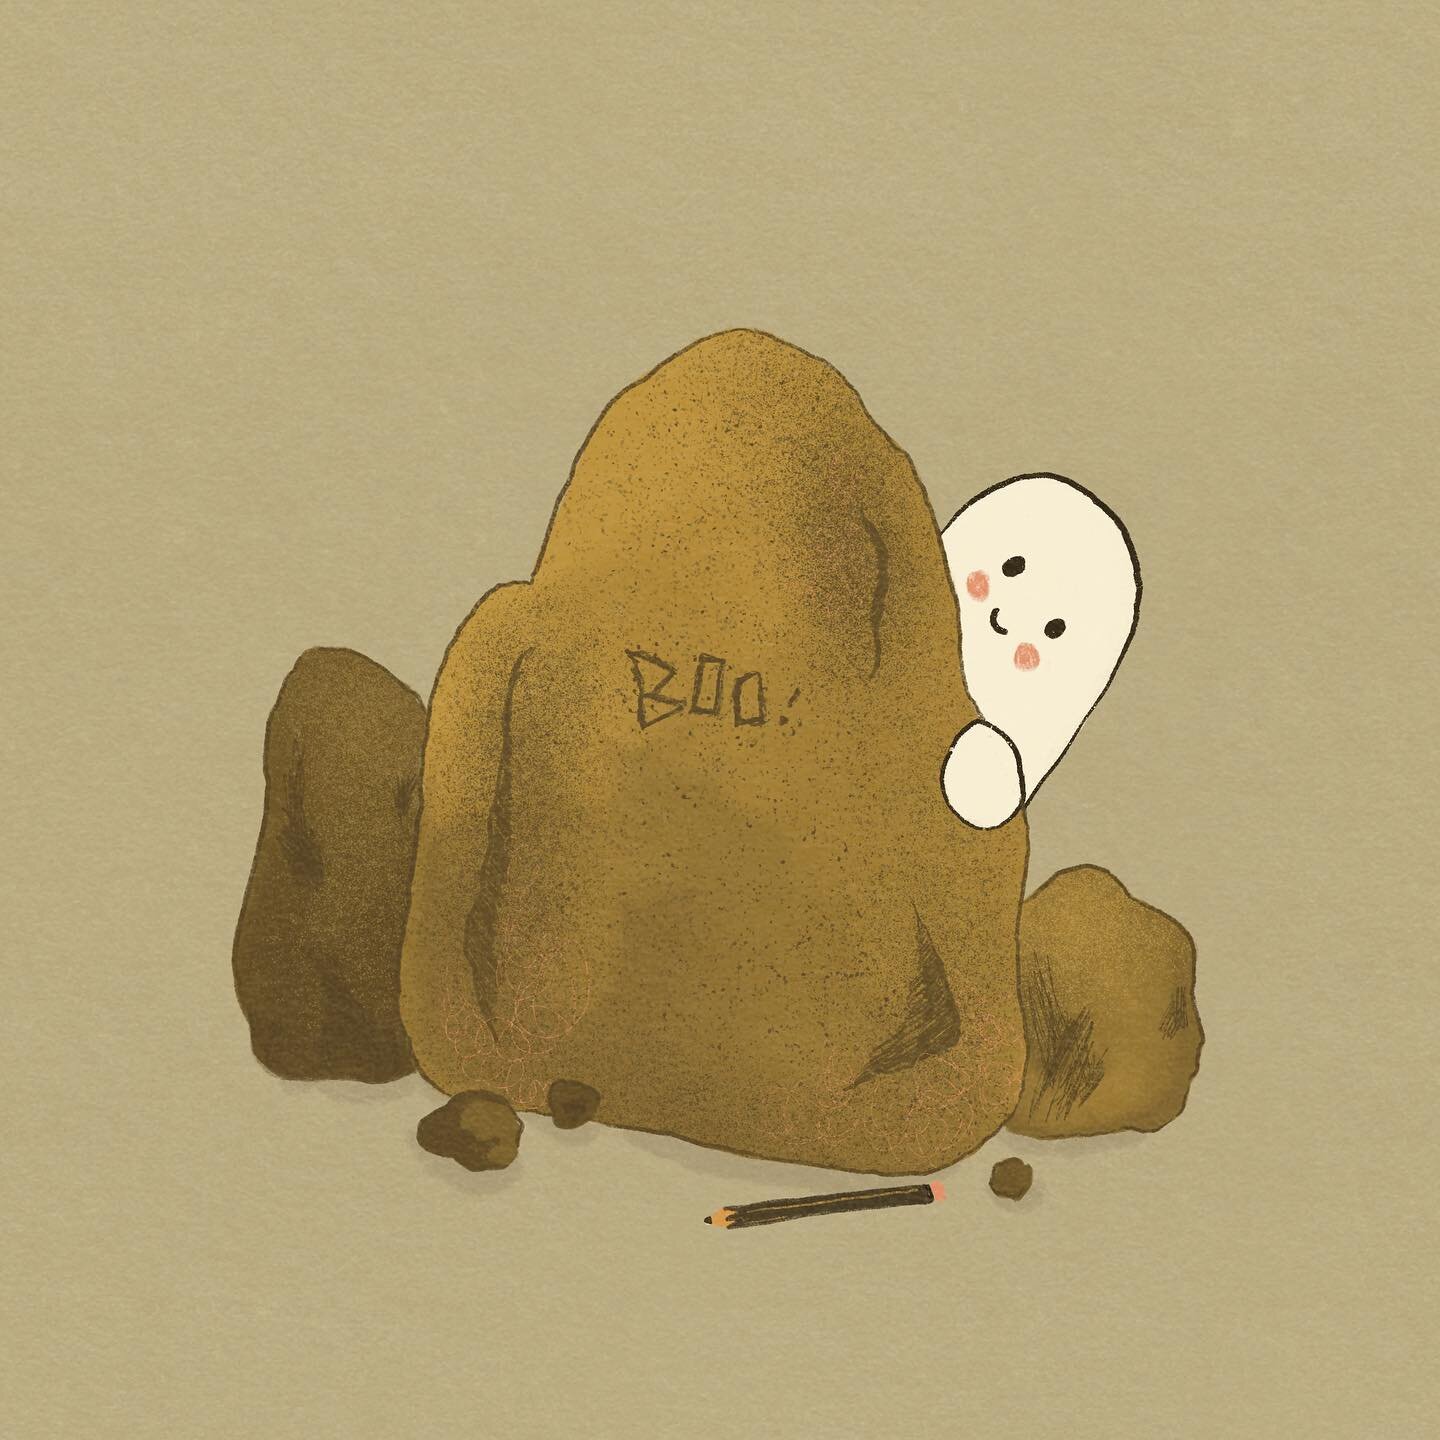 @peachtober Day 09: Boulder. Peek-a-Boo! 

I&rsquo;m challenging myself to do all of the  #peachtober22 prompts with my character Boo the Wee Ghostie. 👻 Drawn on iPad in the @procreate app. 

Hosted by: @furrylittlepeach 
.
.
.
.
.
.
.

#artistsofin